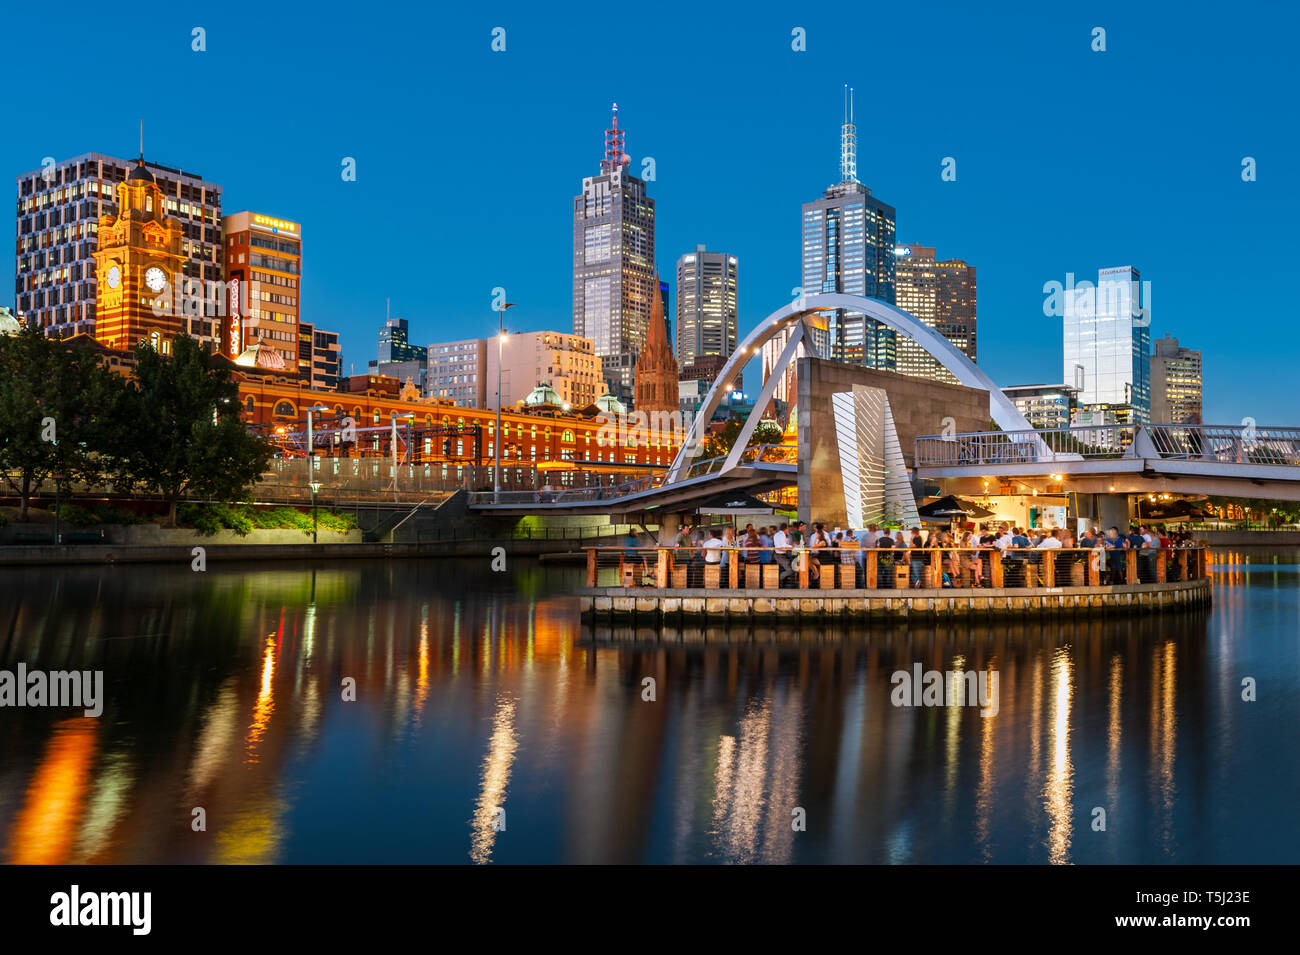 Evening life at Melbourne's Yarra River. Stock Photo